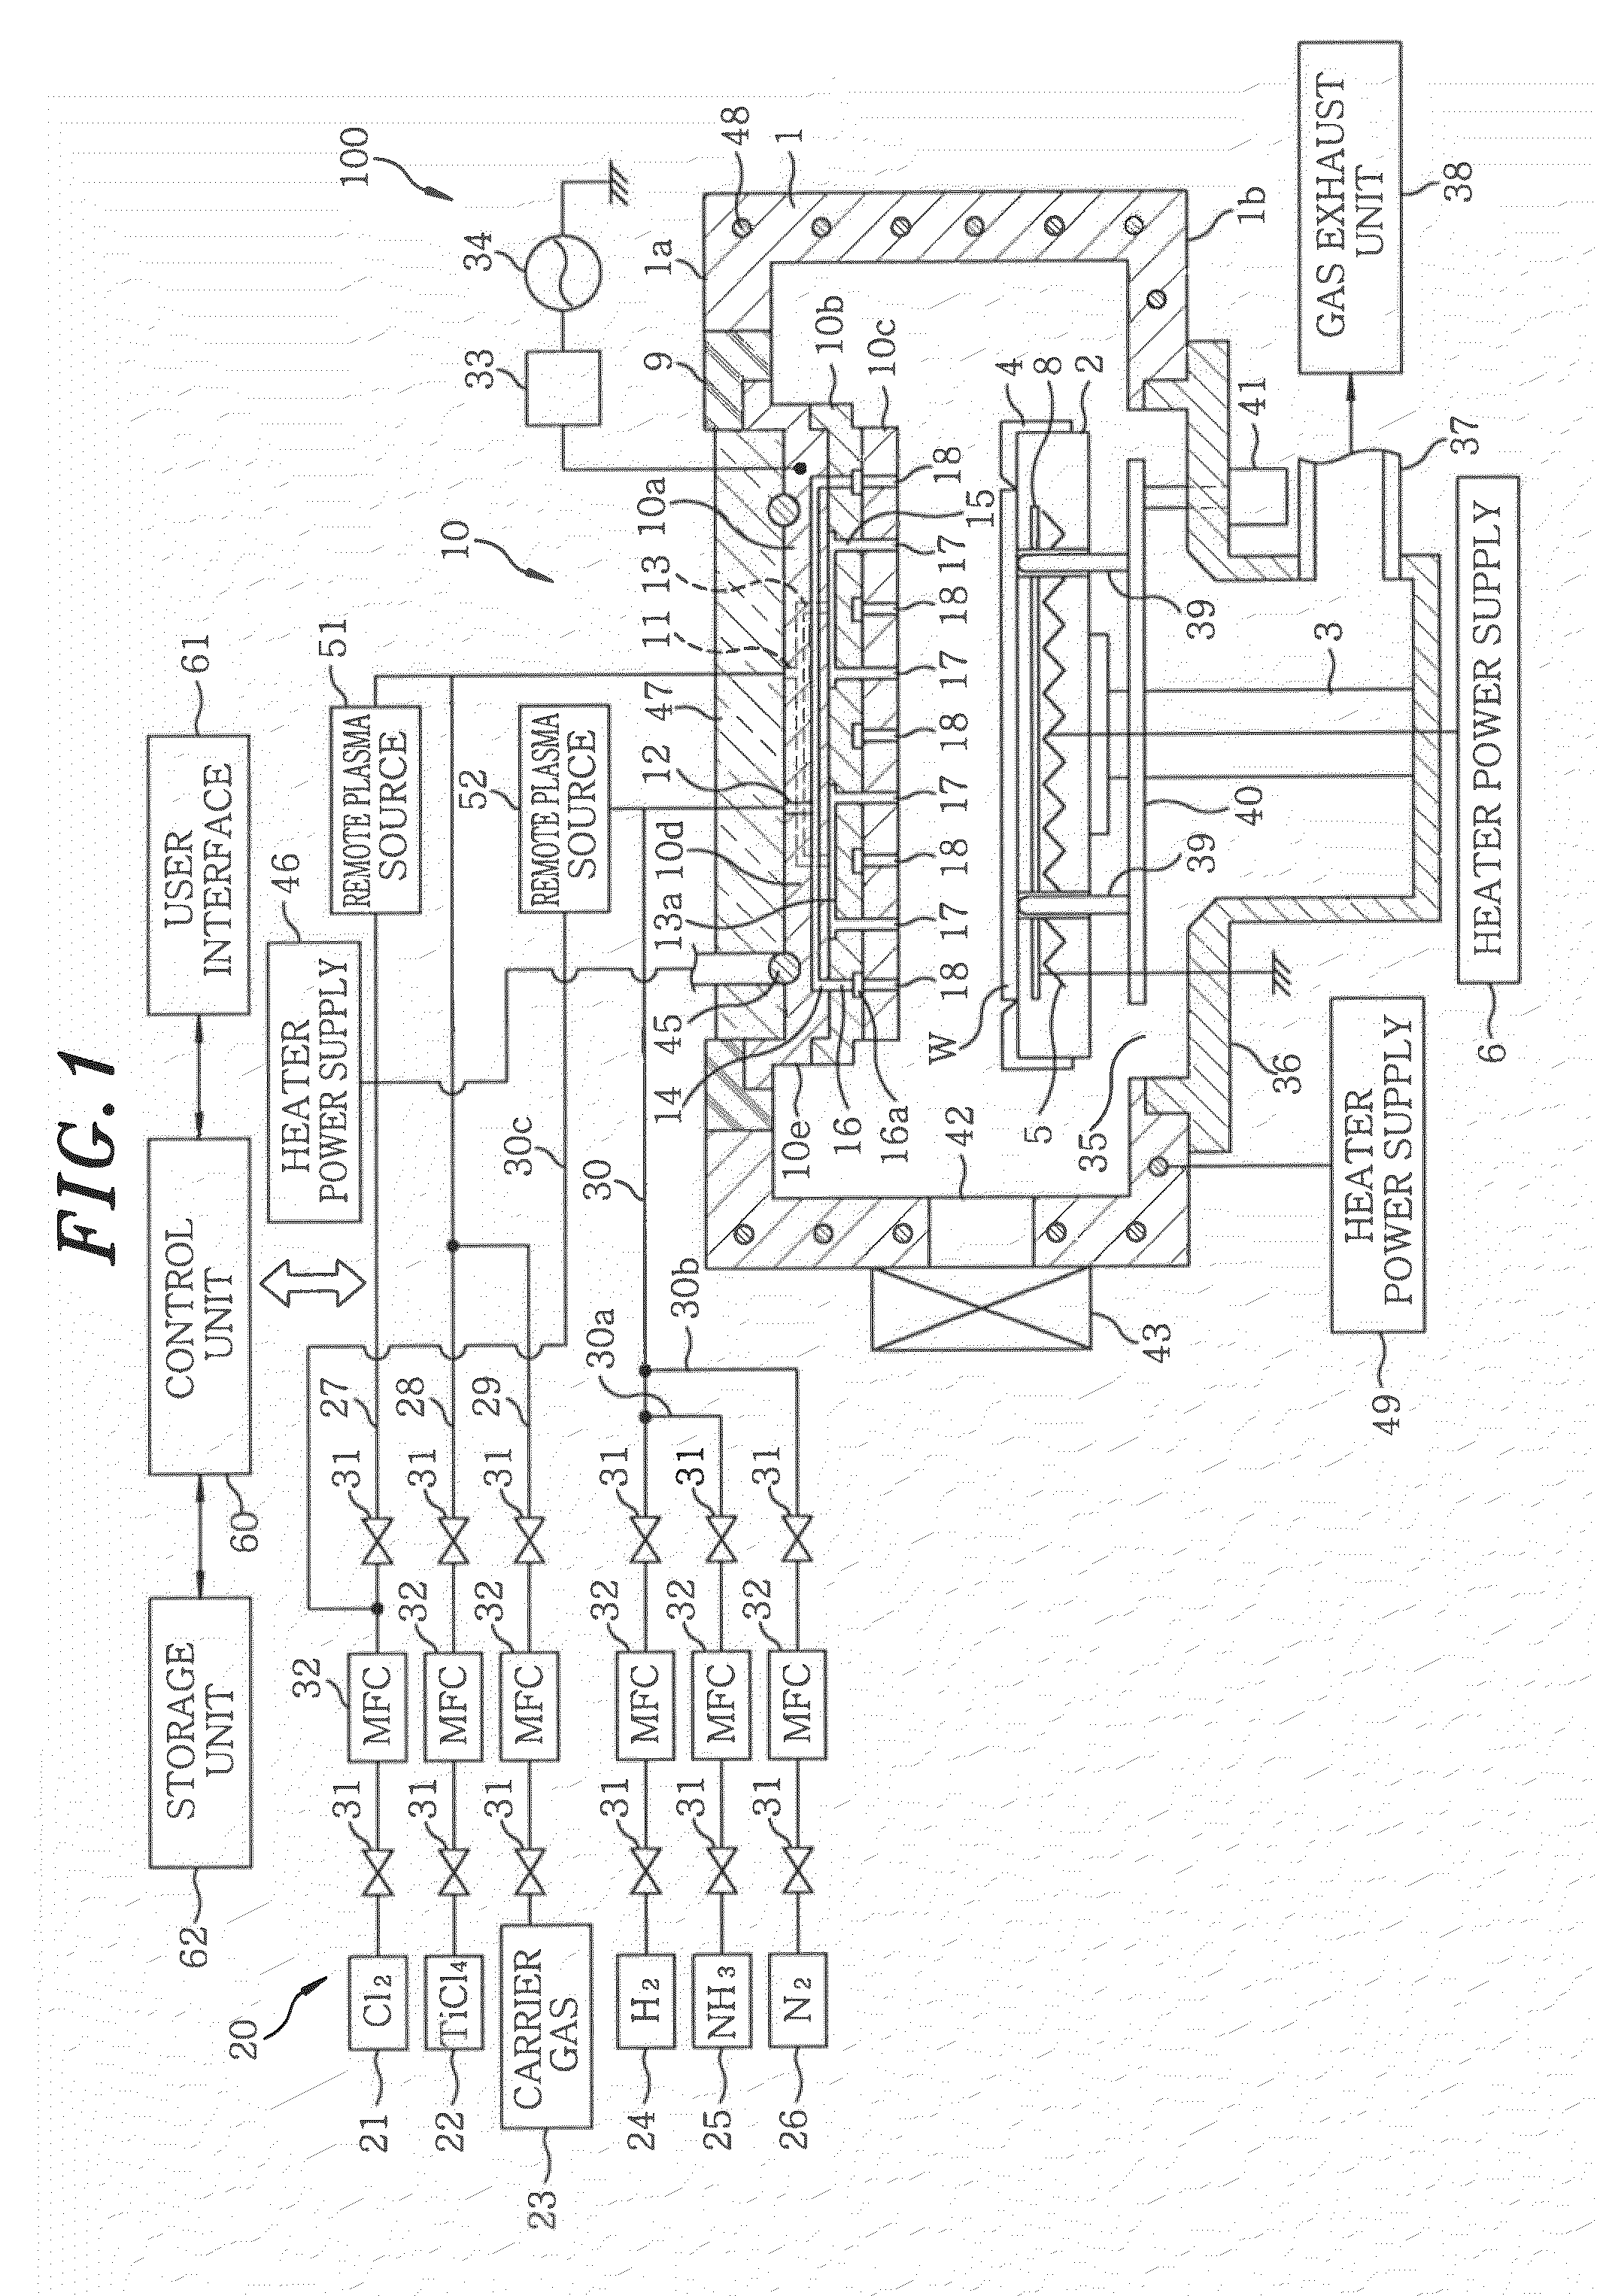 Film formation method, cleaning method and film formation apparatus